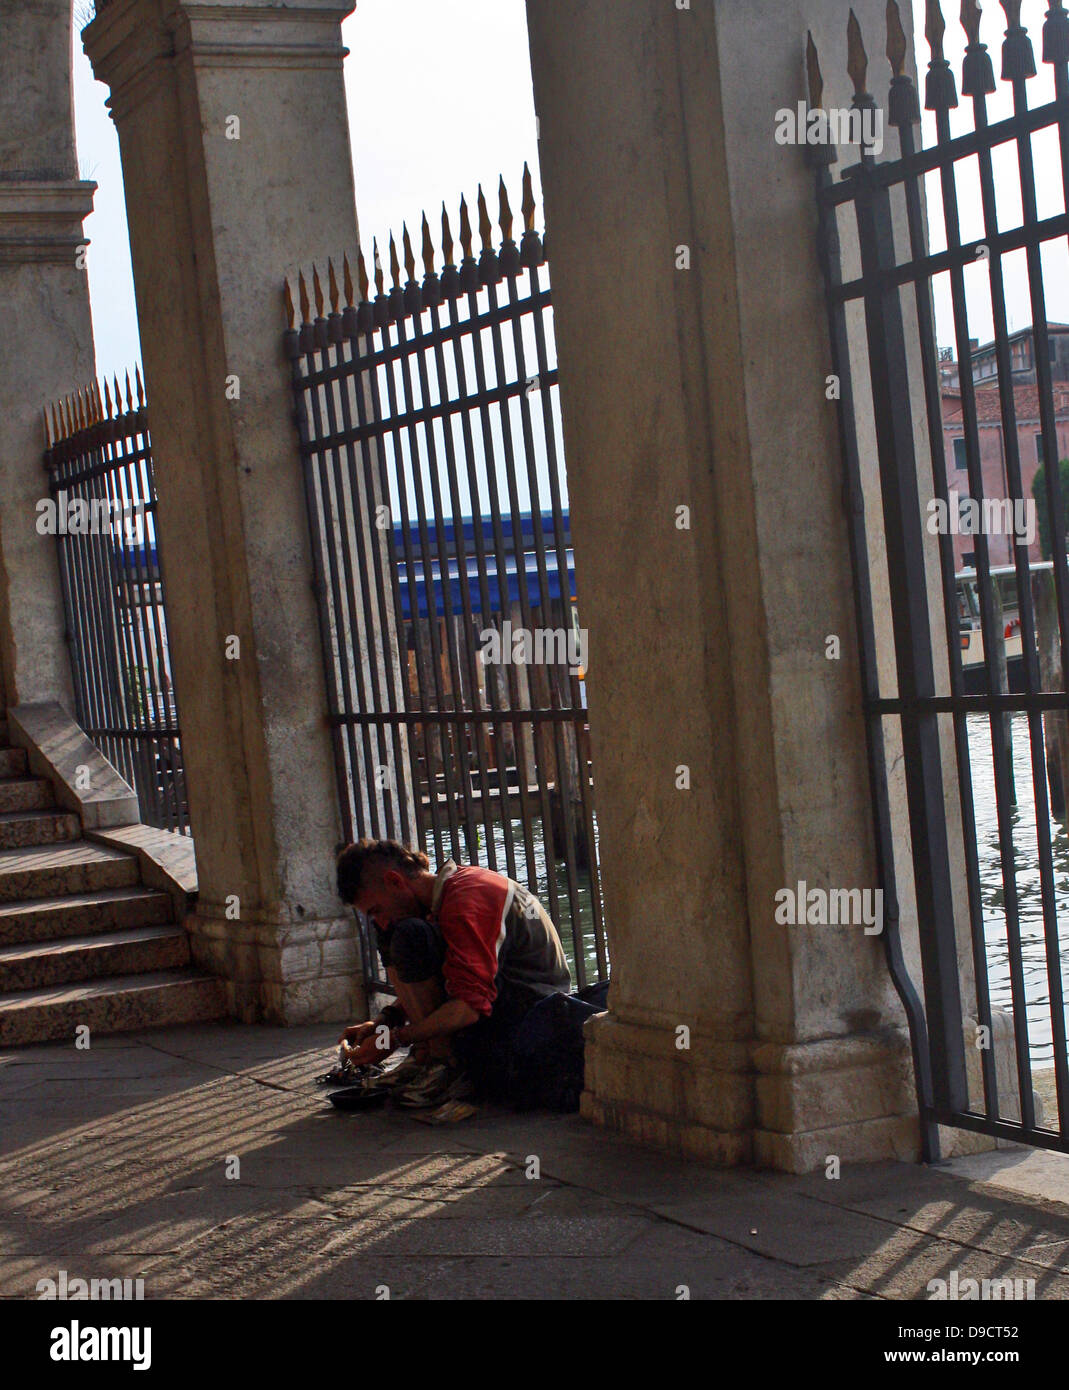 A destitute beggar on the streets of Venice, Italy during the 2008-11 Global Financial crisis. Stock Photo